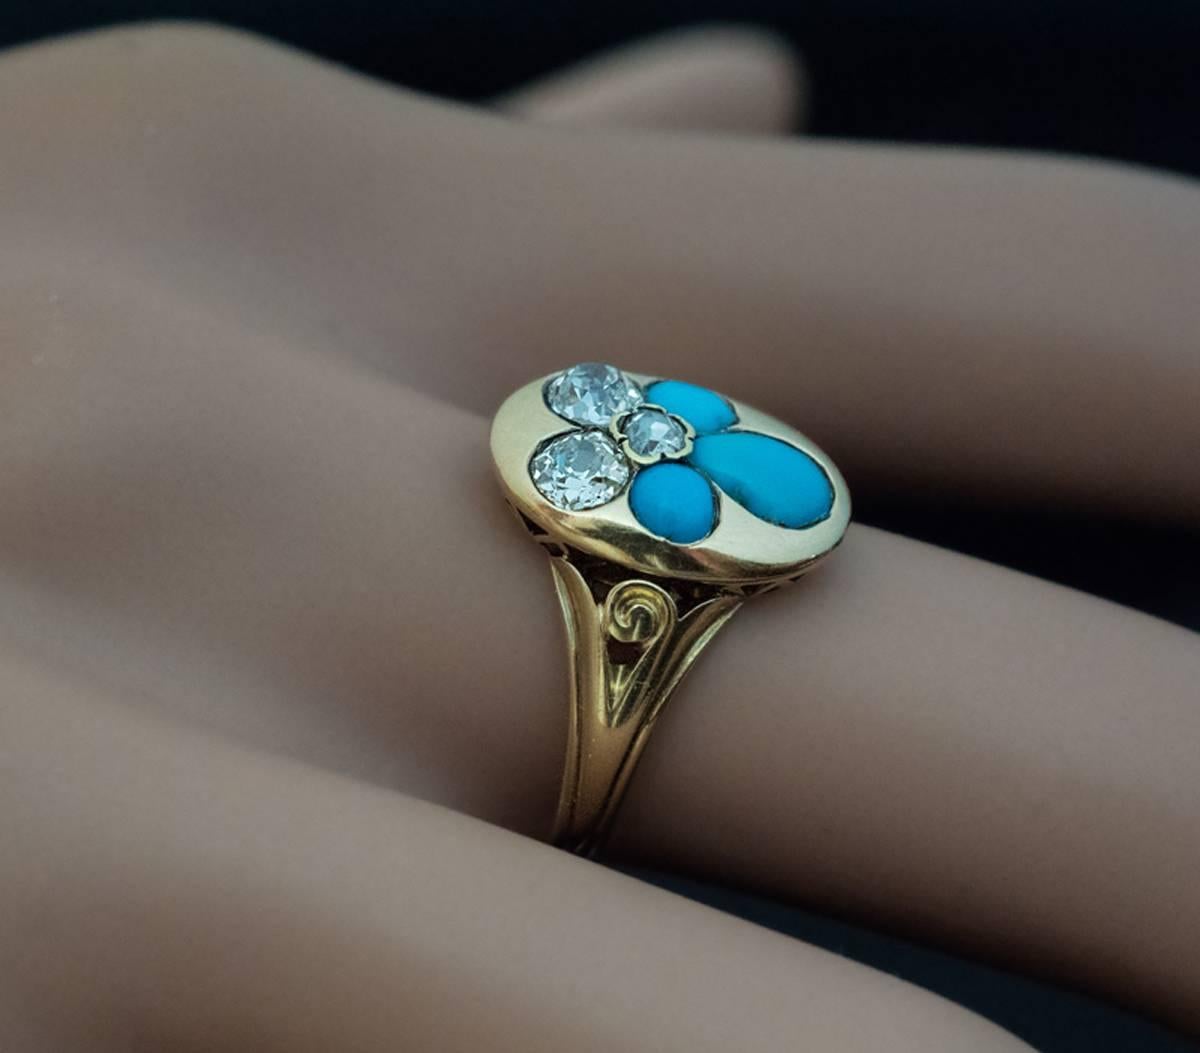 This sentimental antique ring from mid Victorian era was made in St. Petersburg in 1865.  The 14K gold ring features a stylized forget-me-not set with cabochon cut turquoise, two old cushion cut diamonds, and one rose cut diamond. The flower is